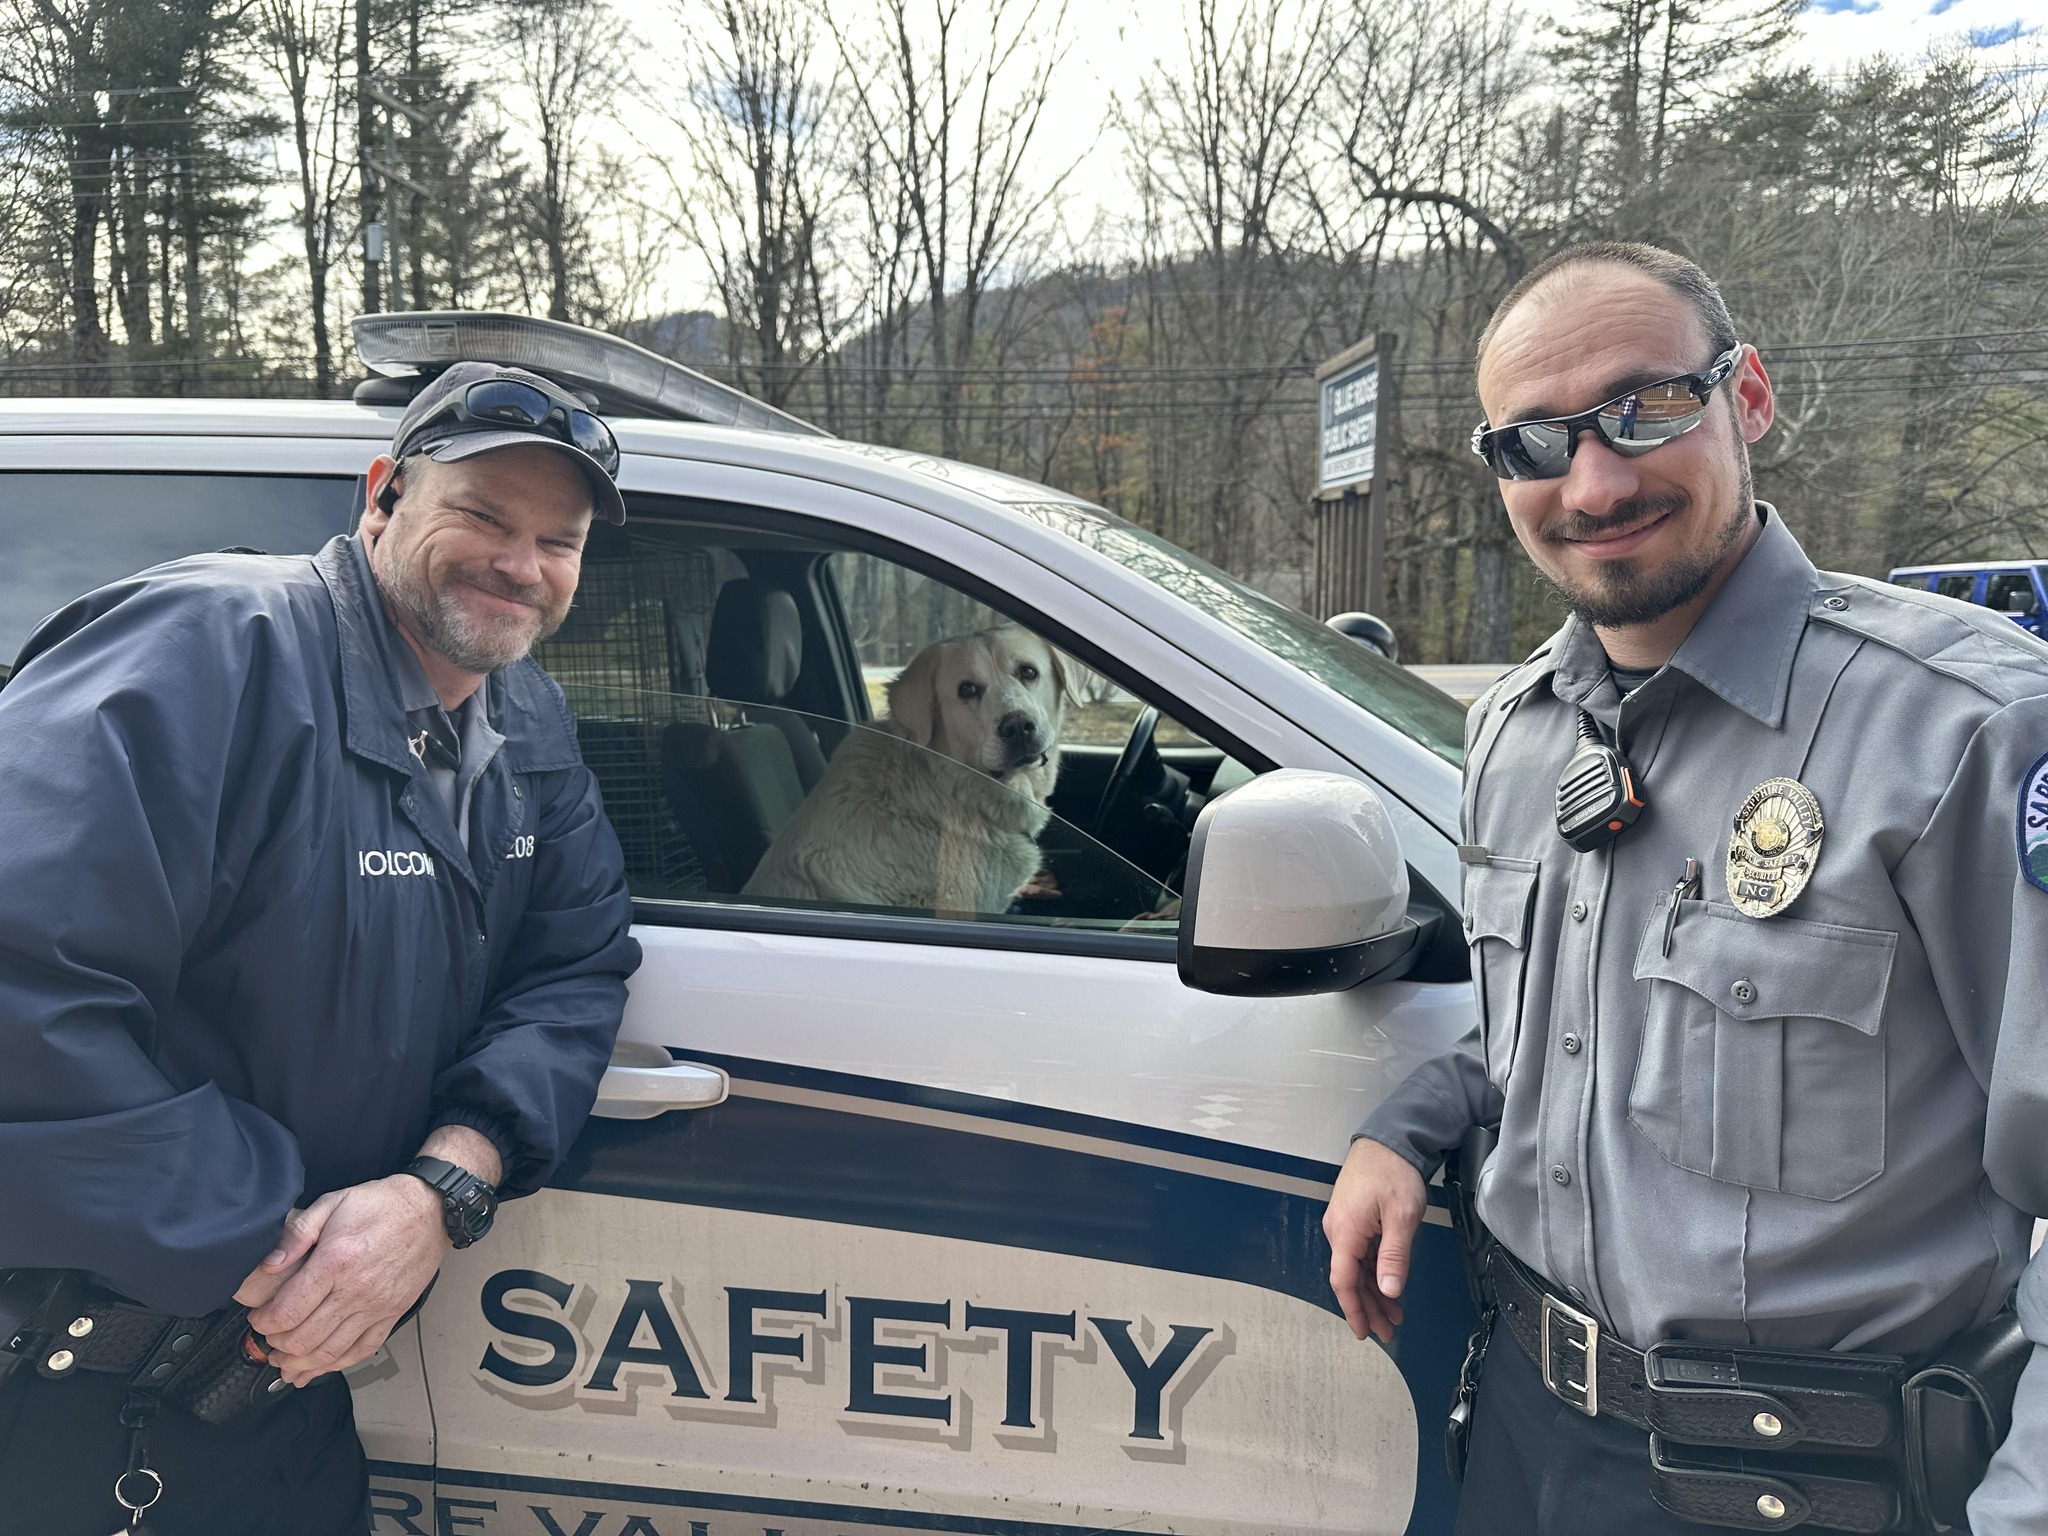 police officers posing with dog in the car